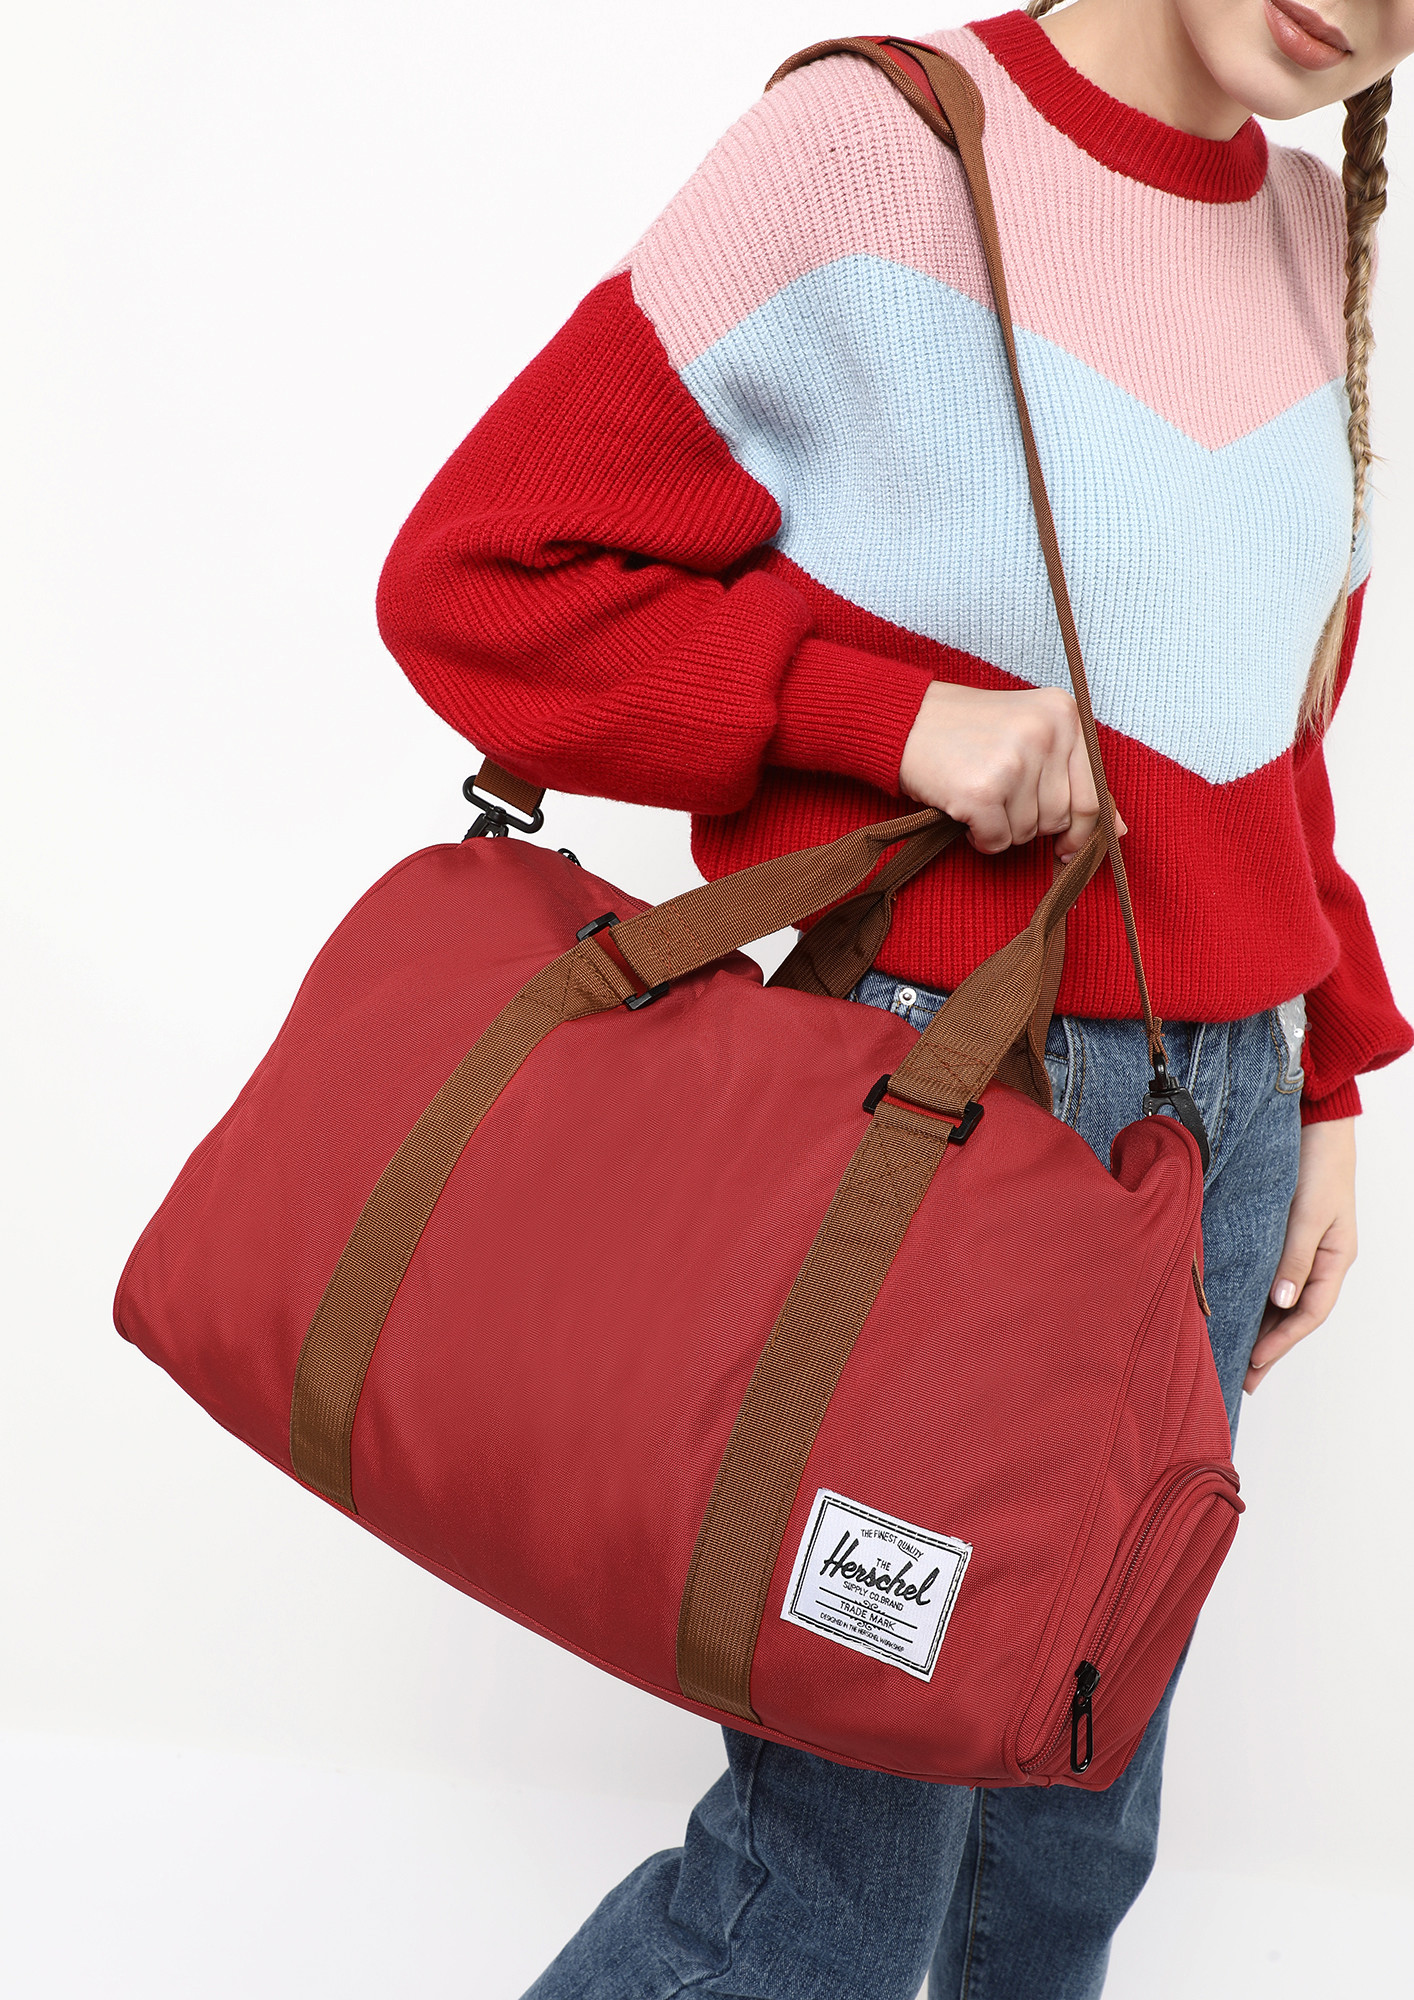 WORK IT OUT RED DUFFLE BAG